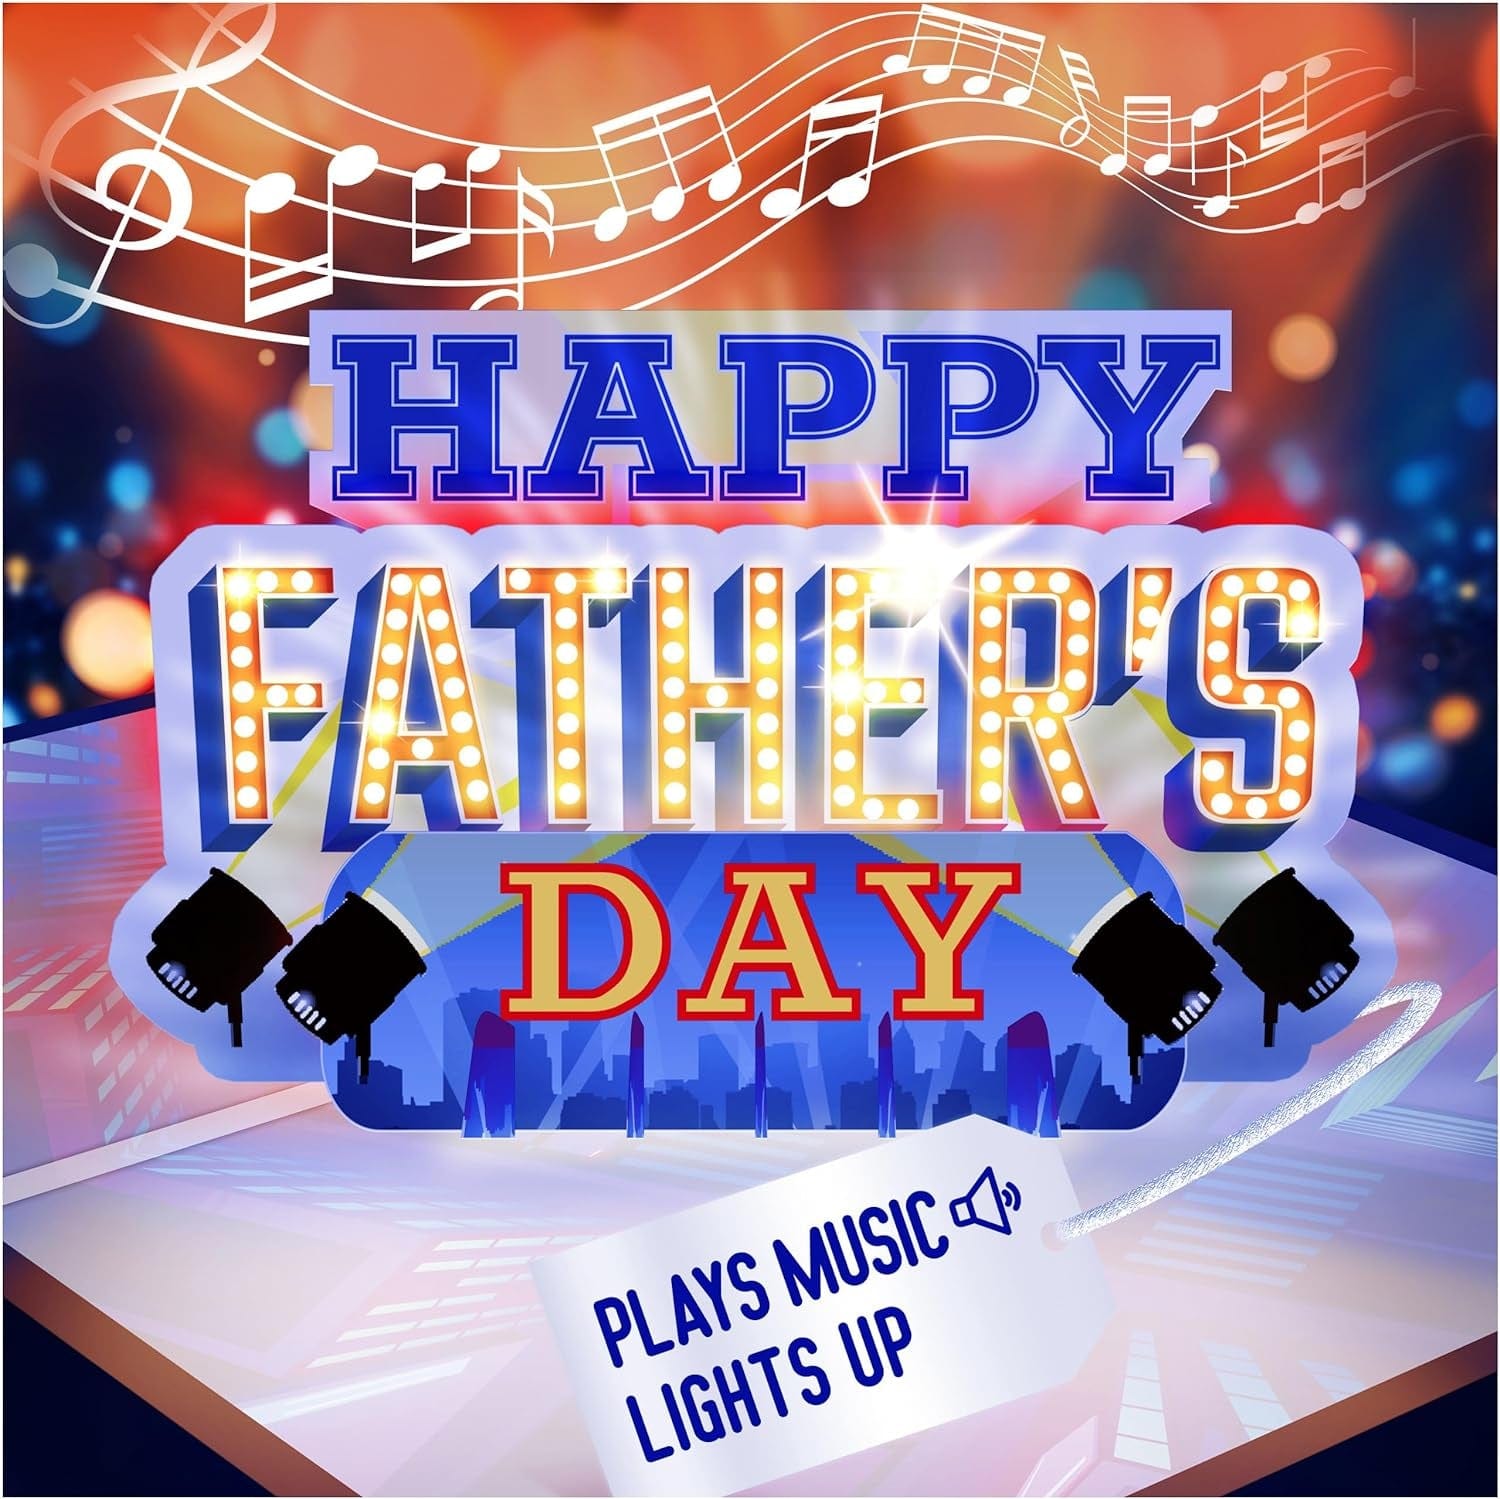 GeckoCustom Lights & Music Pop up Fathers Day Card, Plays 'All Star' Song, Happy Fathers Day Card from Daughter, Father'S Day Cards for Husband, Fathers Day Card from Son, Fathers Day Cards, 1 Best Dad Ever Card Hollywood Lights